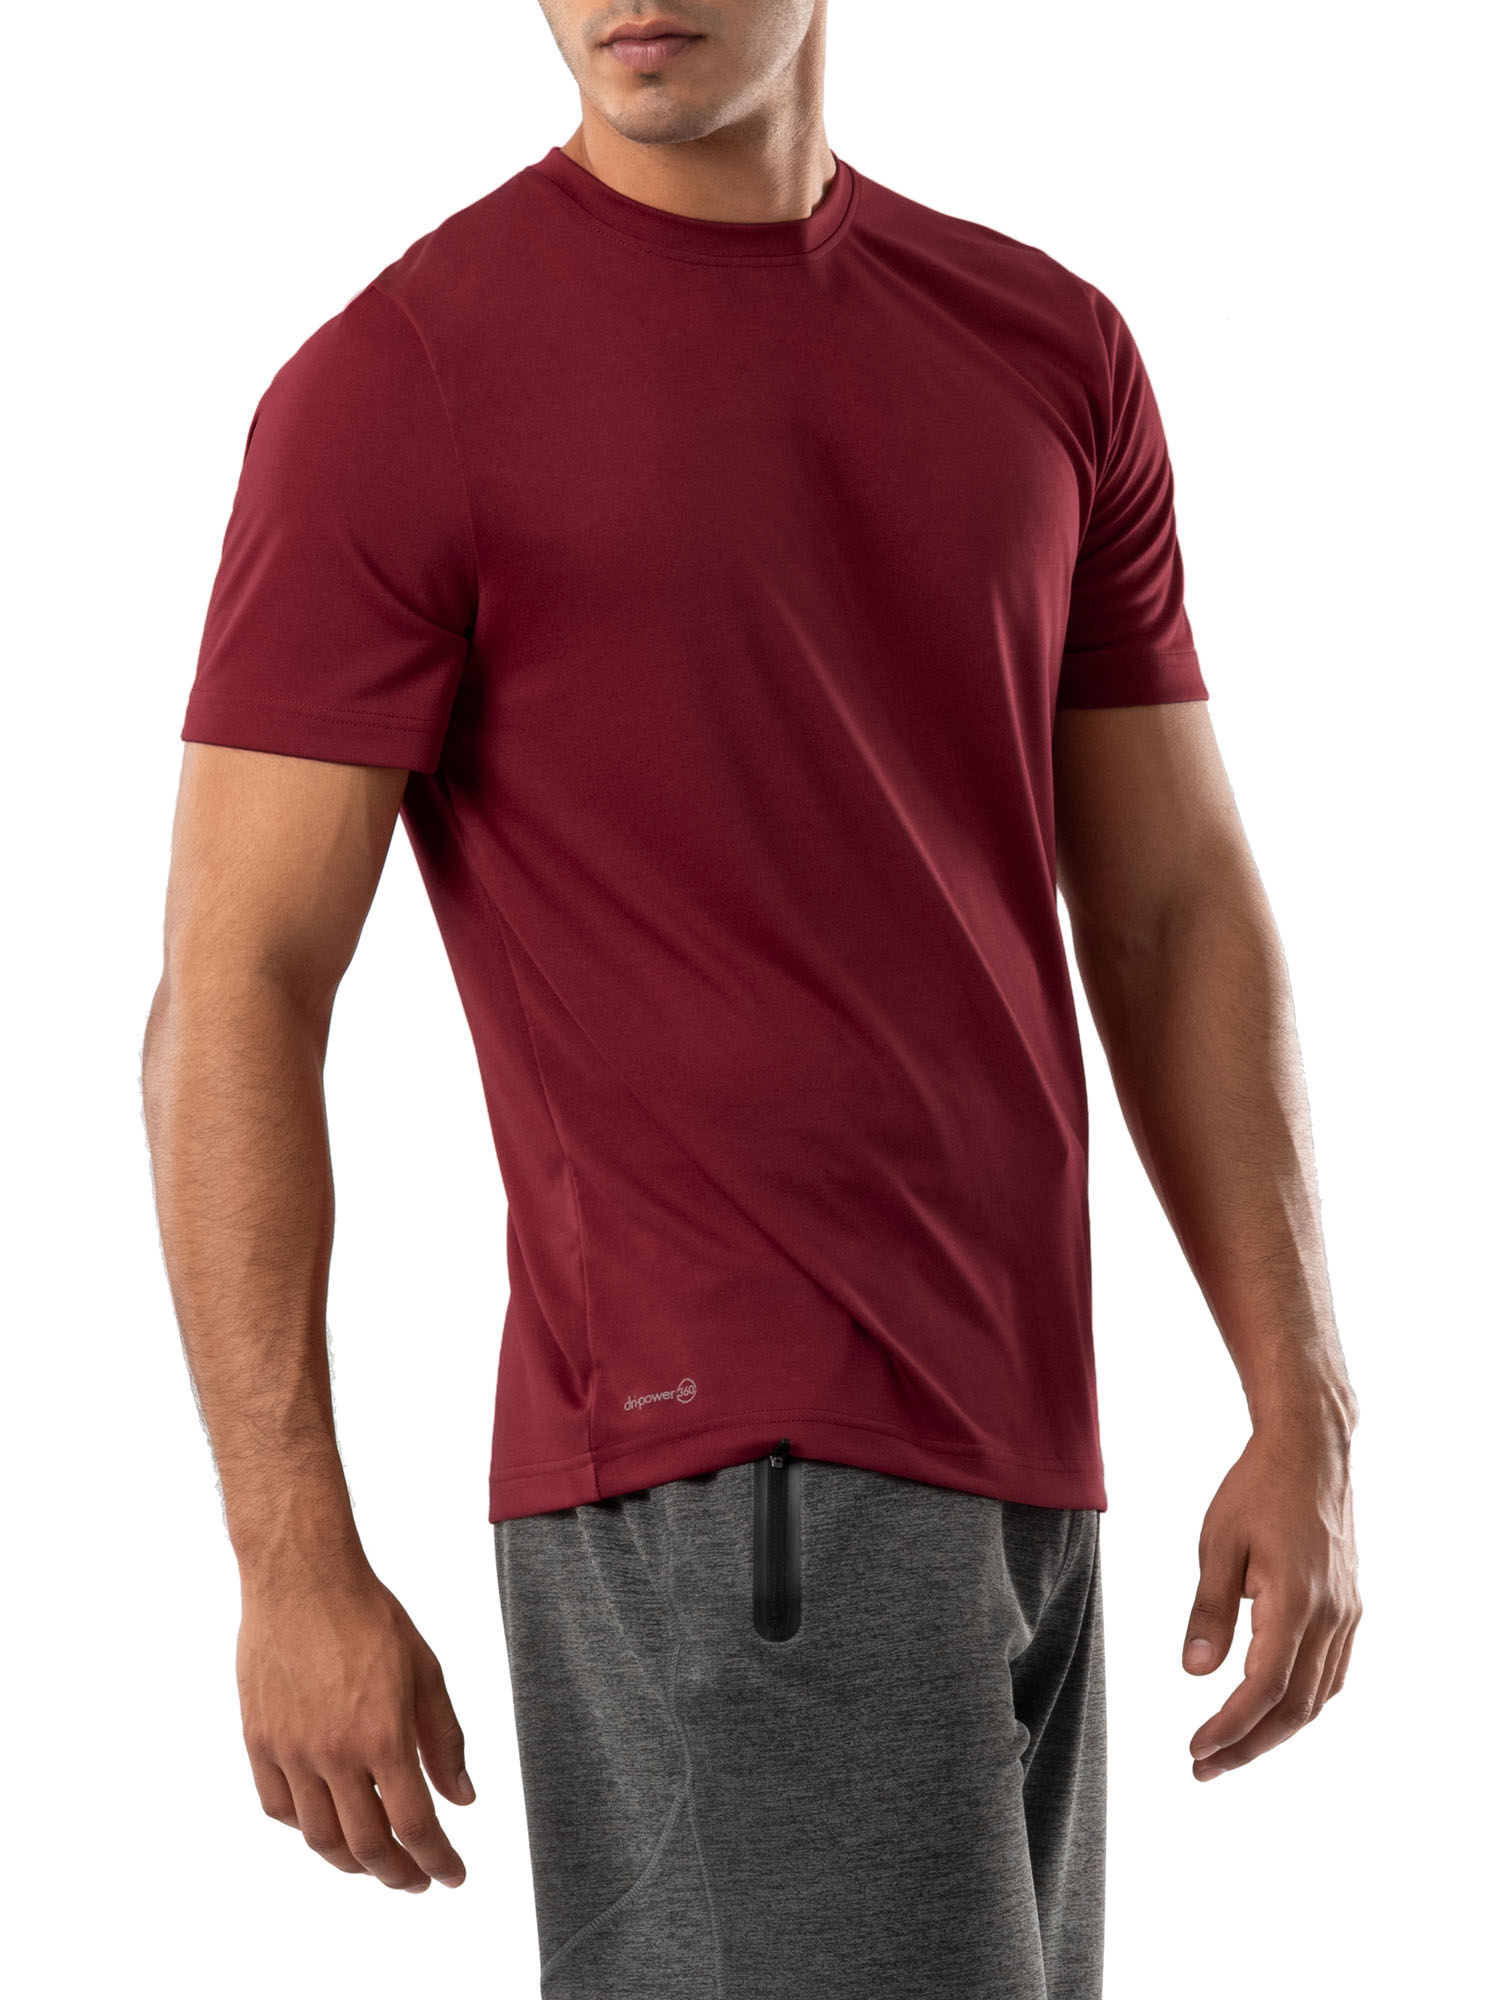 Russell Men's and Big Men's Core Jersey Active T-Shirt, up to Size 5XL - image 2 of 7